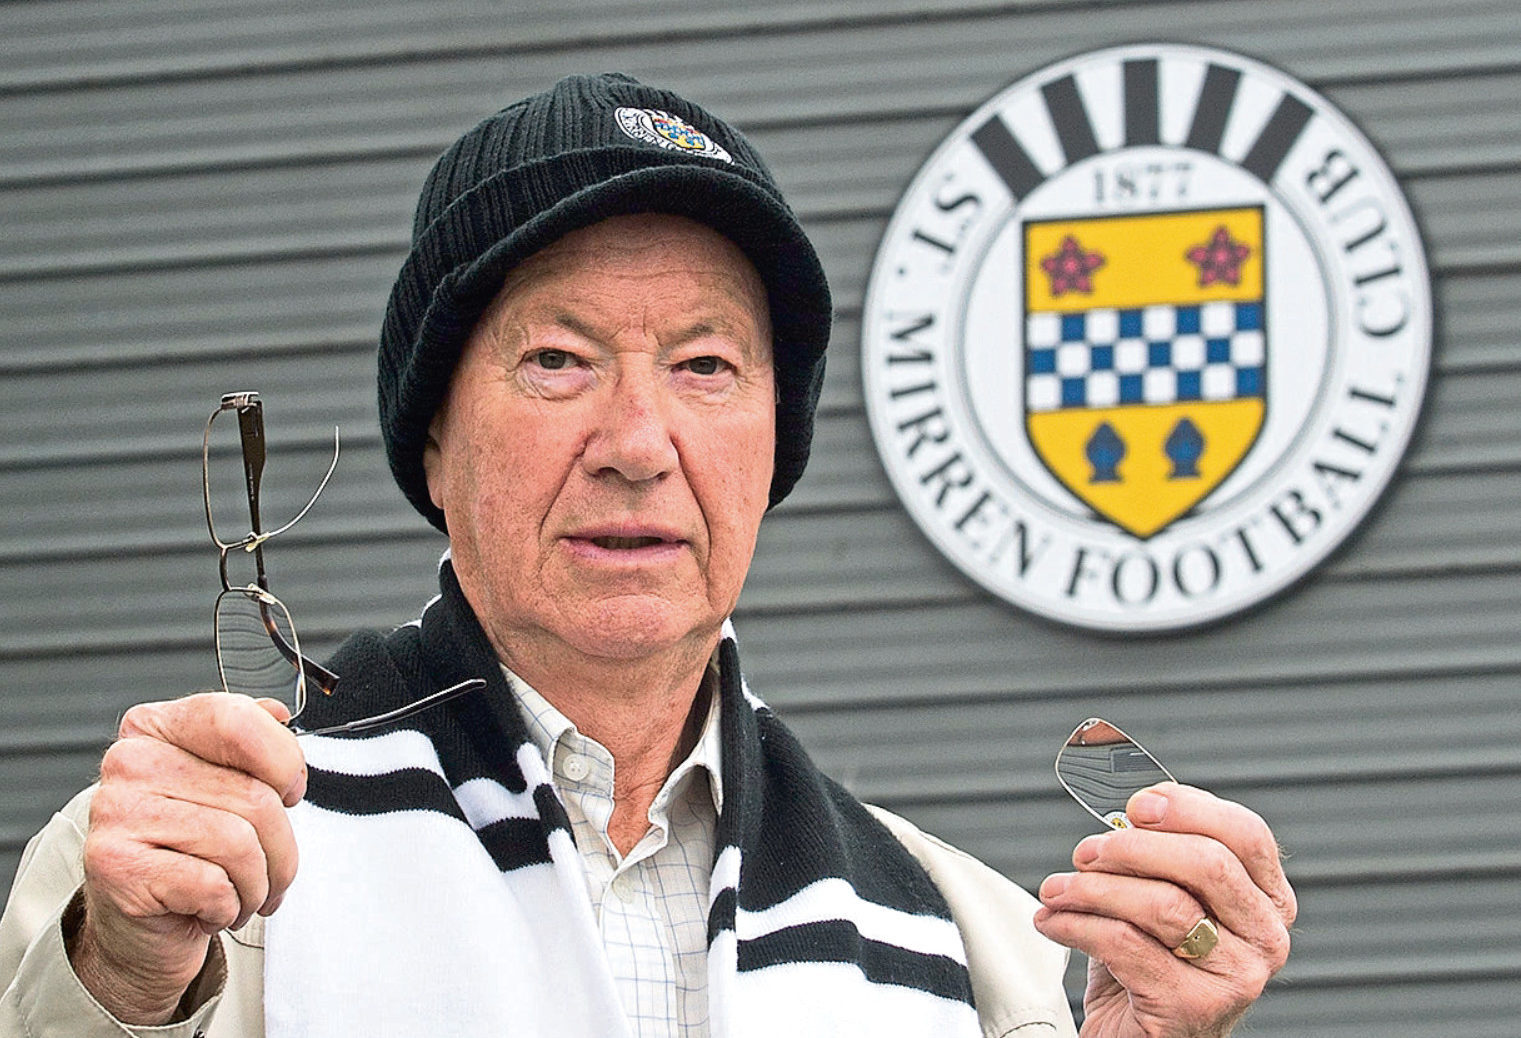 Life-long fan Ernie Lang says St Mirren’s attitude to his injury and broken glasses is like a slap in the face (Mick McGurk)